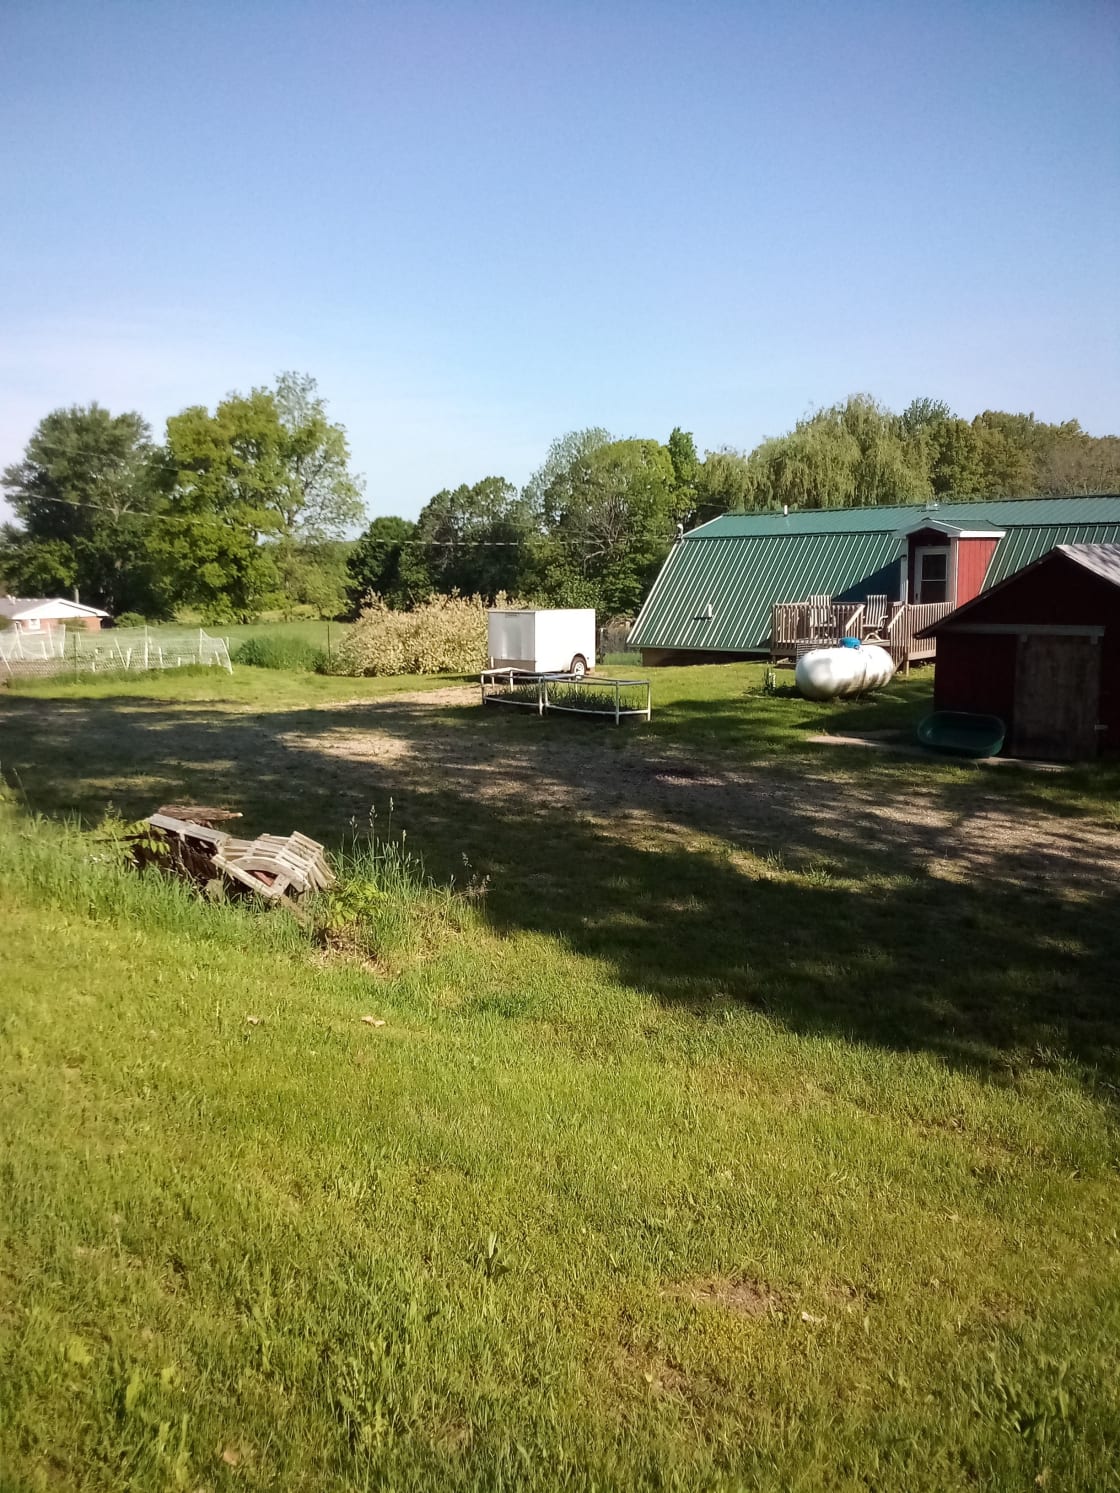 Overview of backyard camping area.  Utility trailer is in camp site